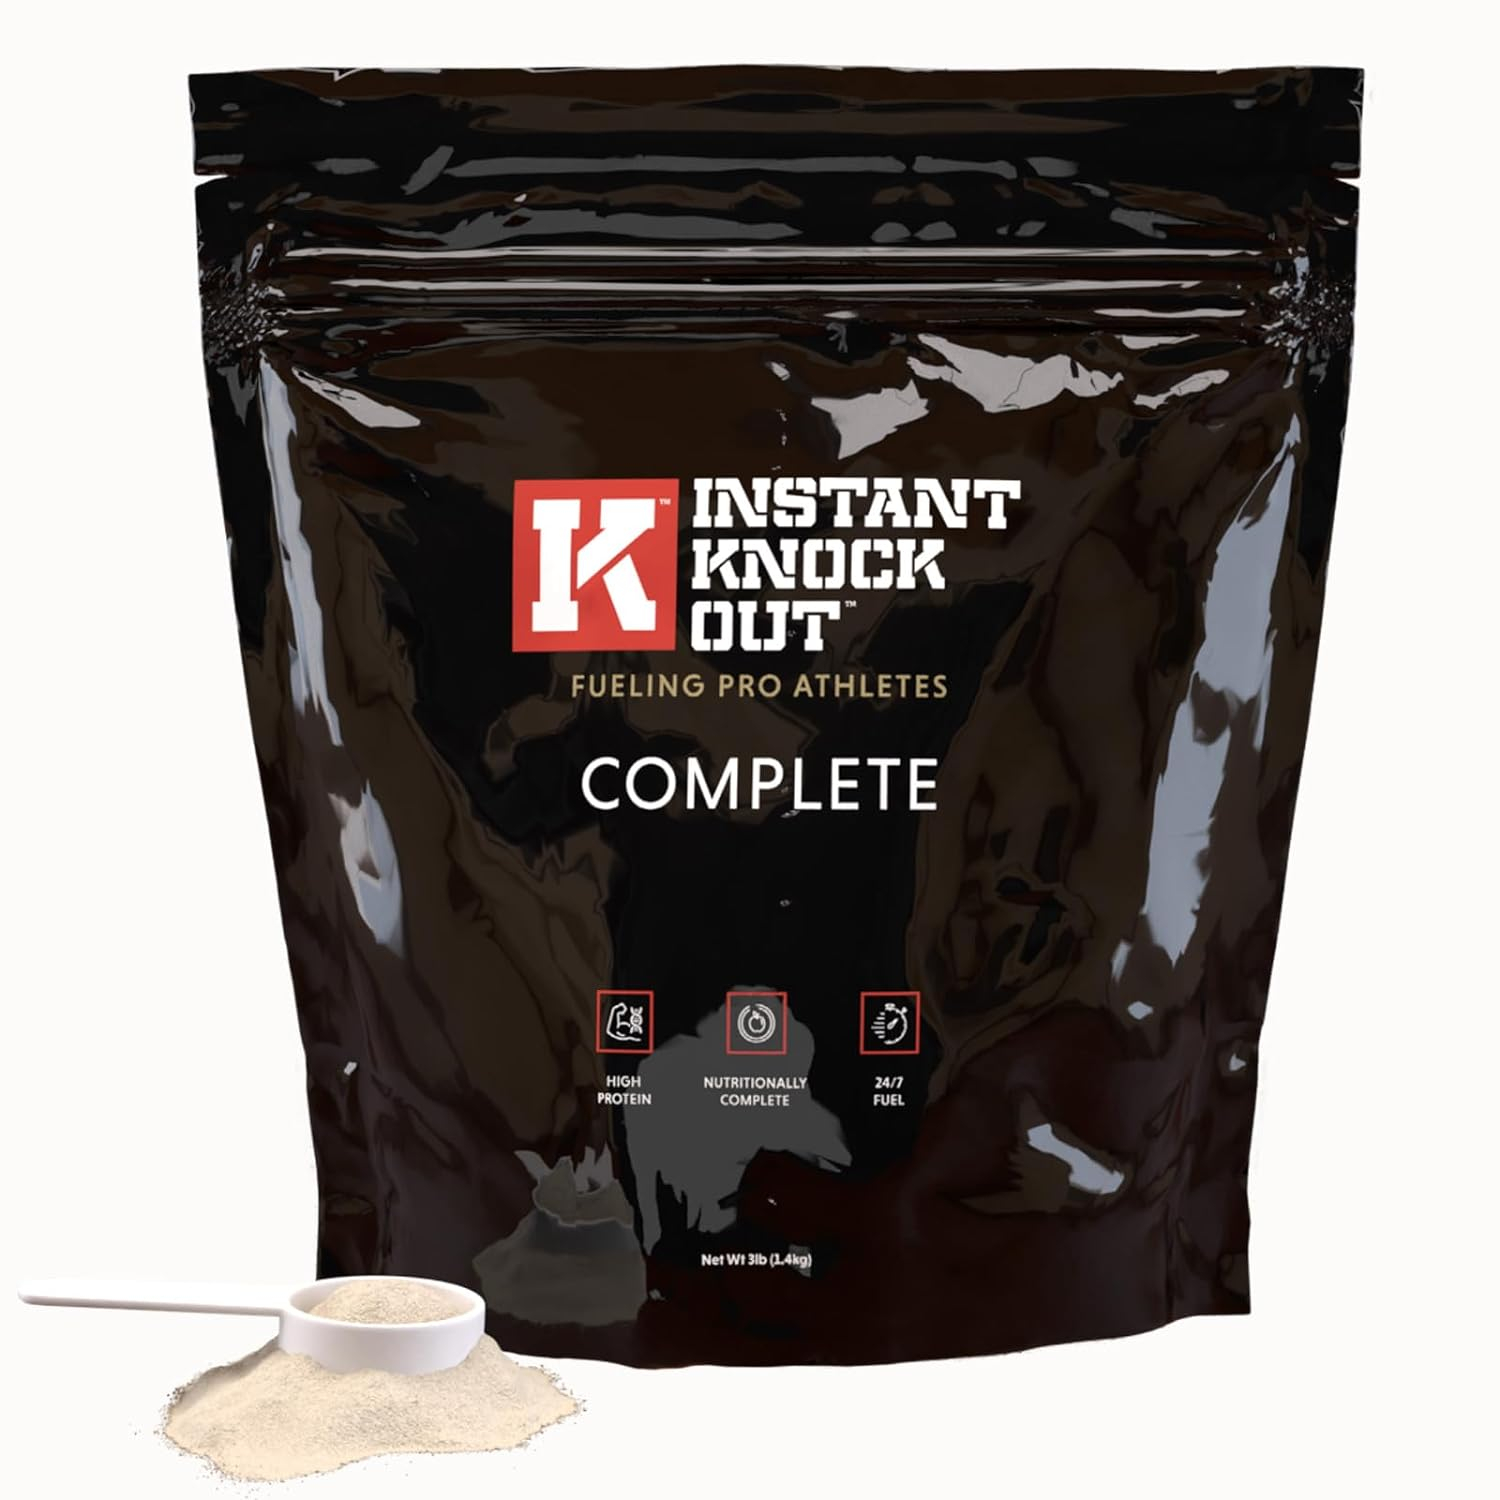 Instant Knockout Complete Shred - Meal Replacement Shake - Vanilla - High-Protein, Vitamin-Enriched, Nutritionally Complete - 14 Servings